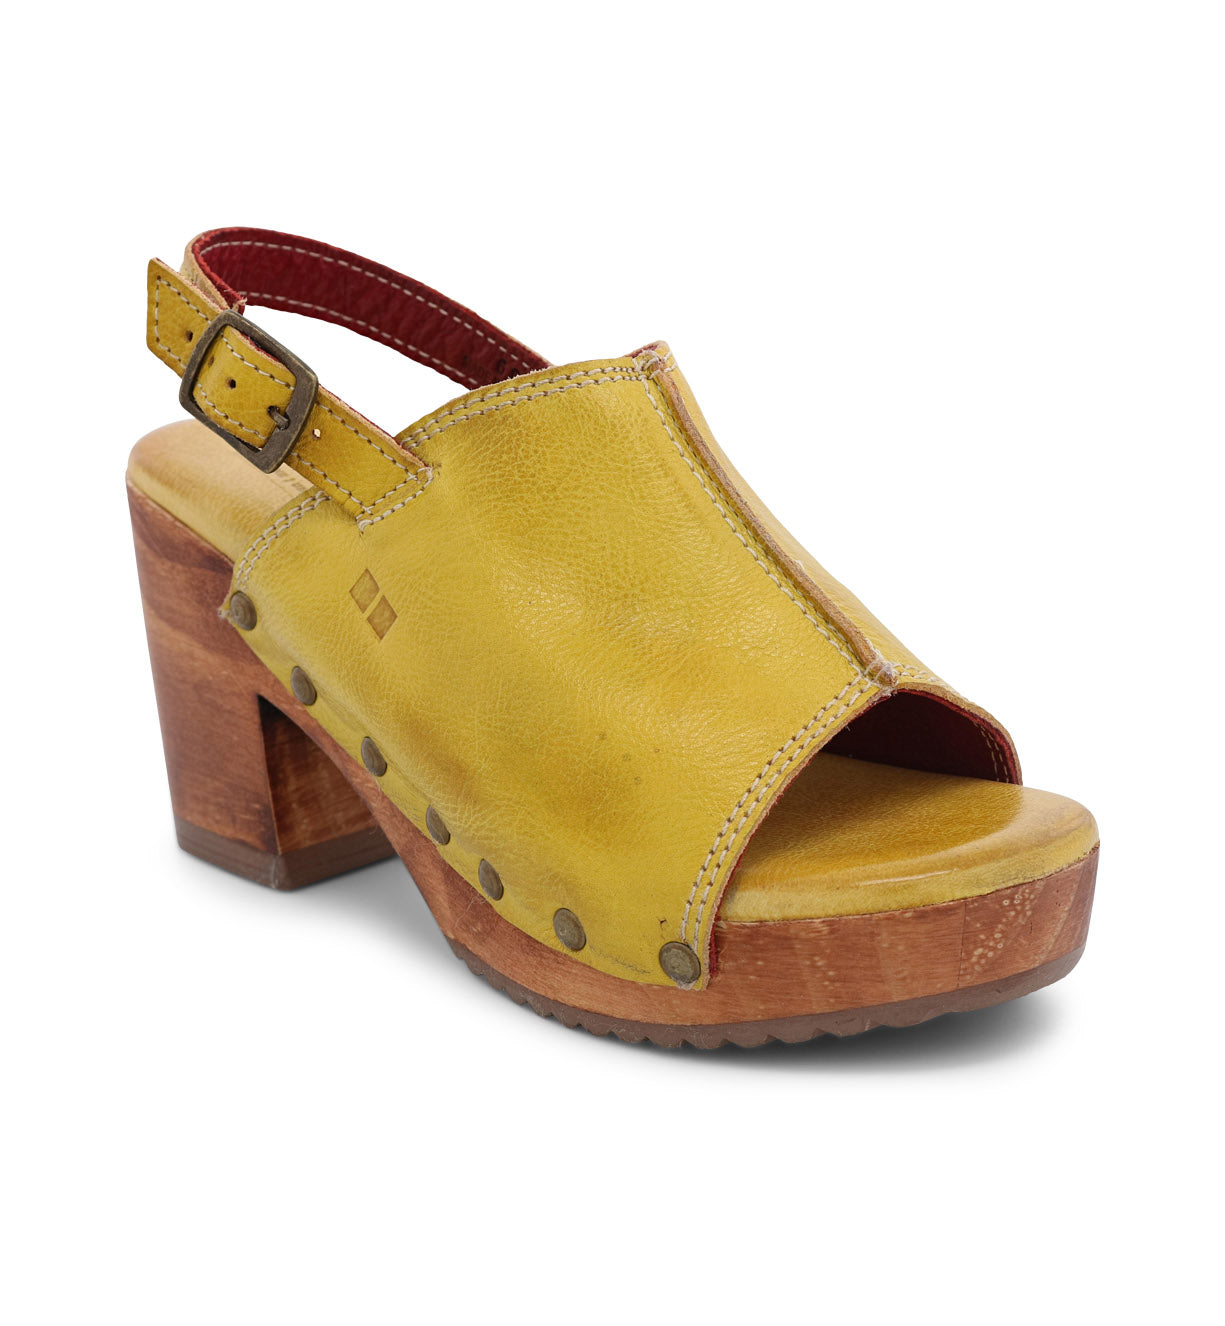 A women's yellow Marie sandal with wooden heel by Bed Stu.